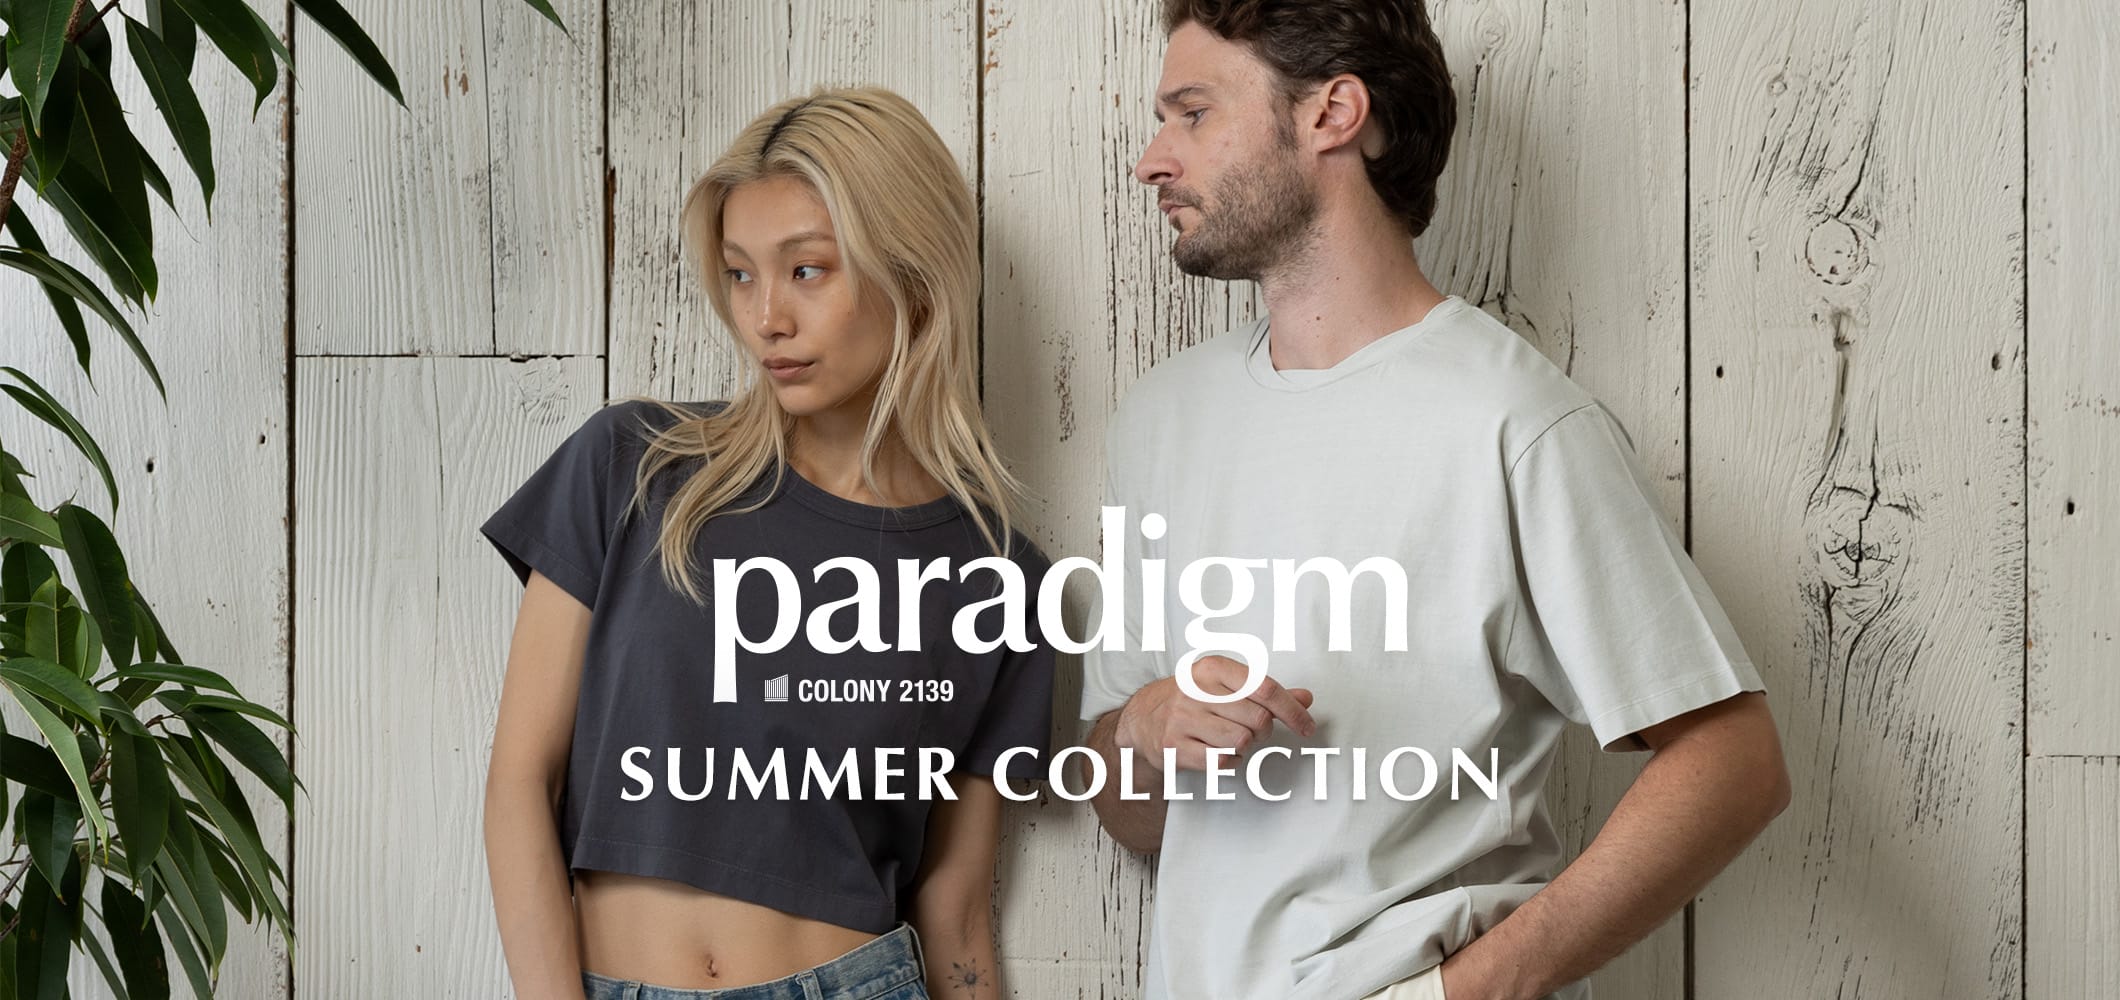 【paradigm】SUMMER COLLECTION